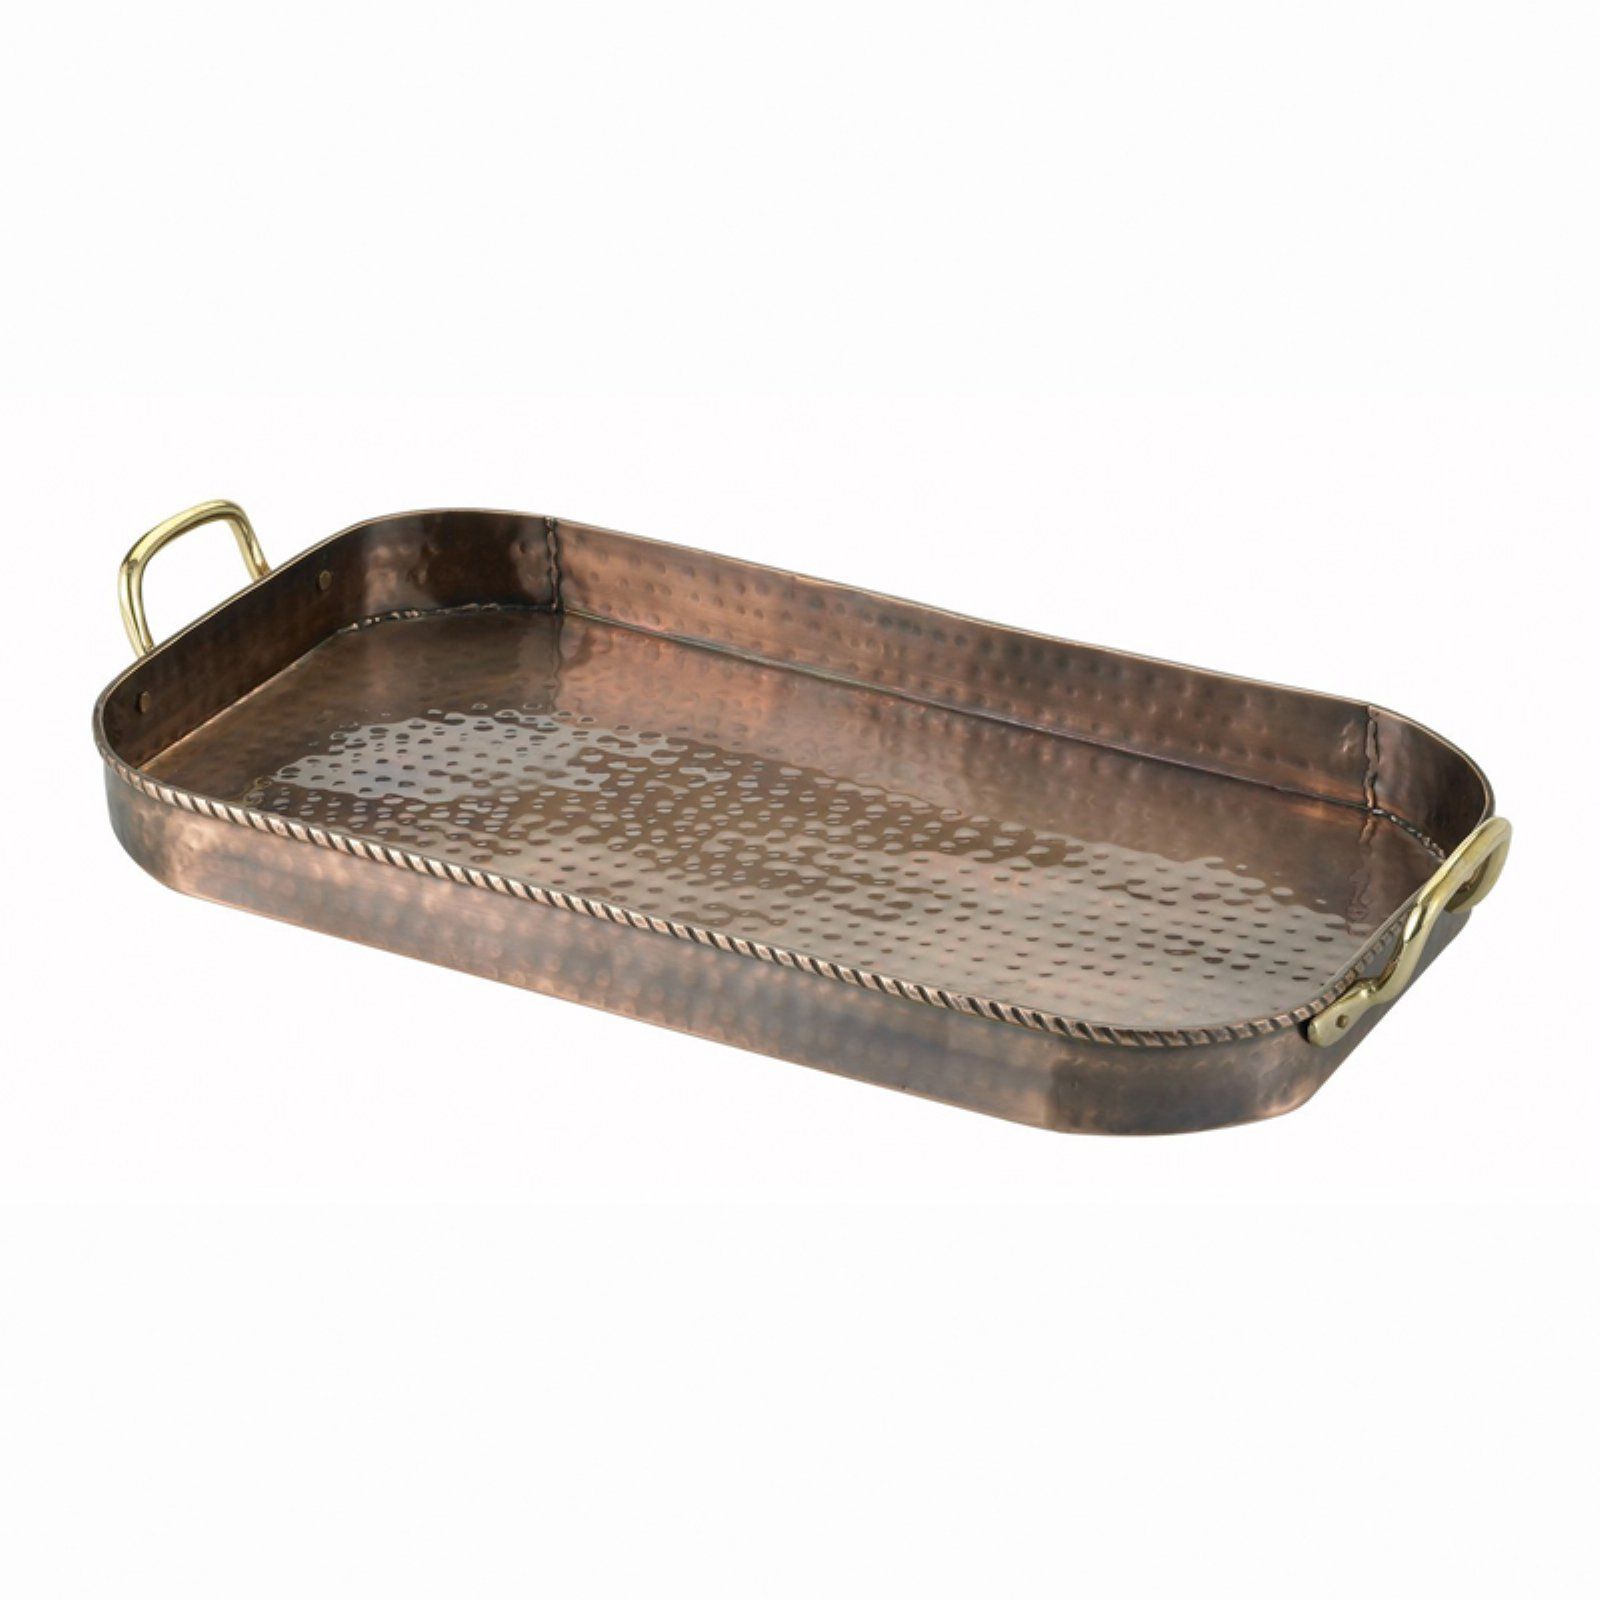 Hammered Antique Copper Oblong Tray with Cast Brass Handles | Walmart (US)